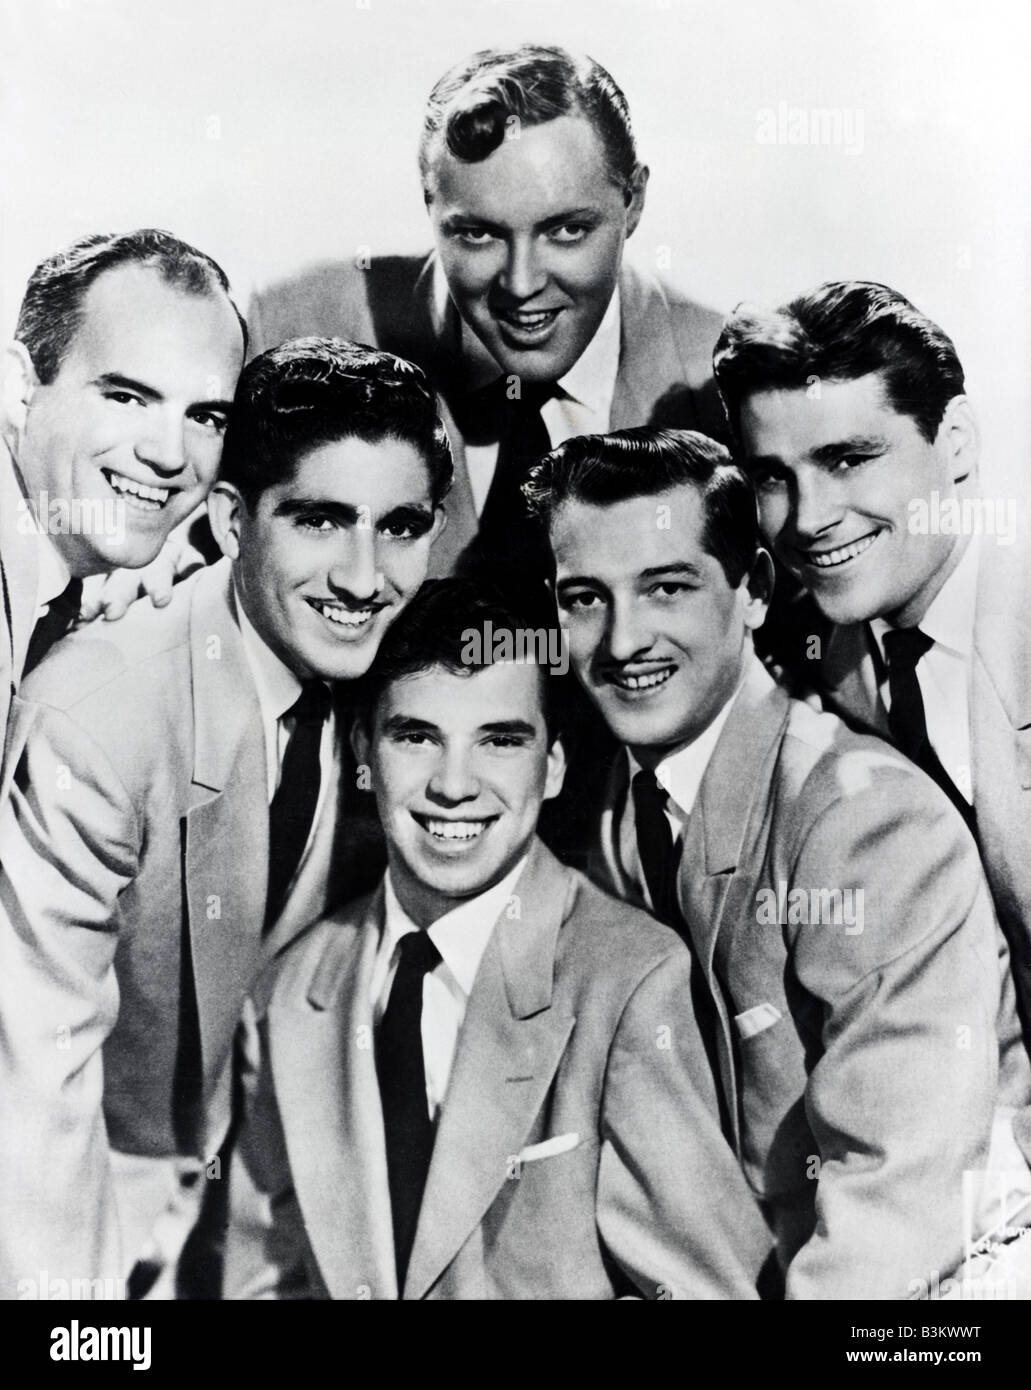 BILL HALEY AND HIS COMETS - US rock n roll pioneers with Haley at top Stock Photo